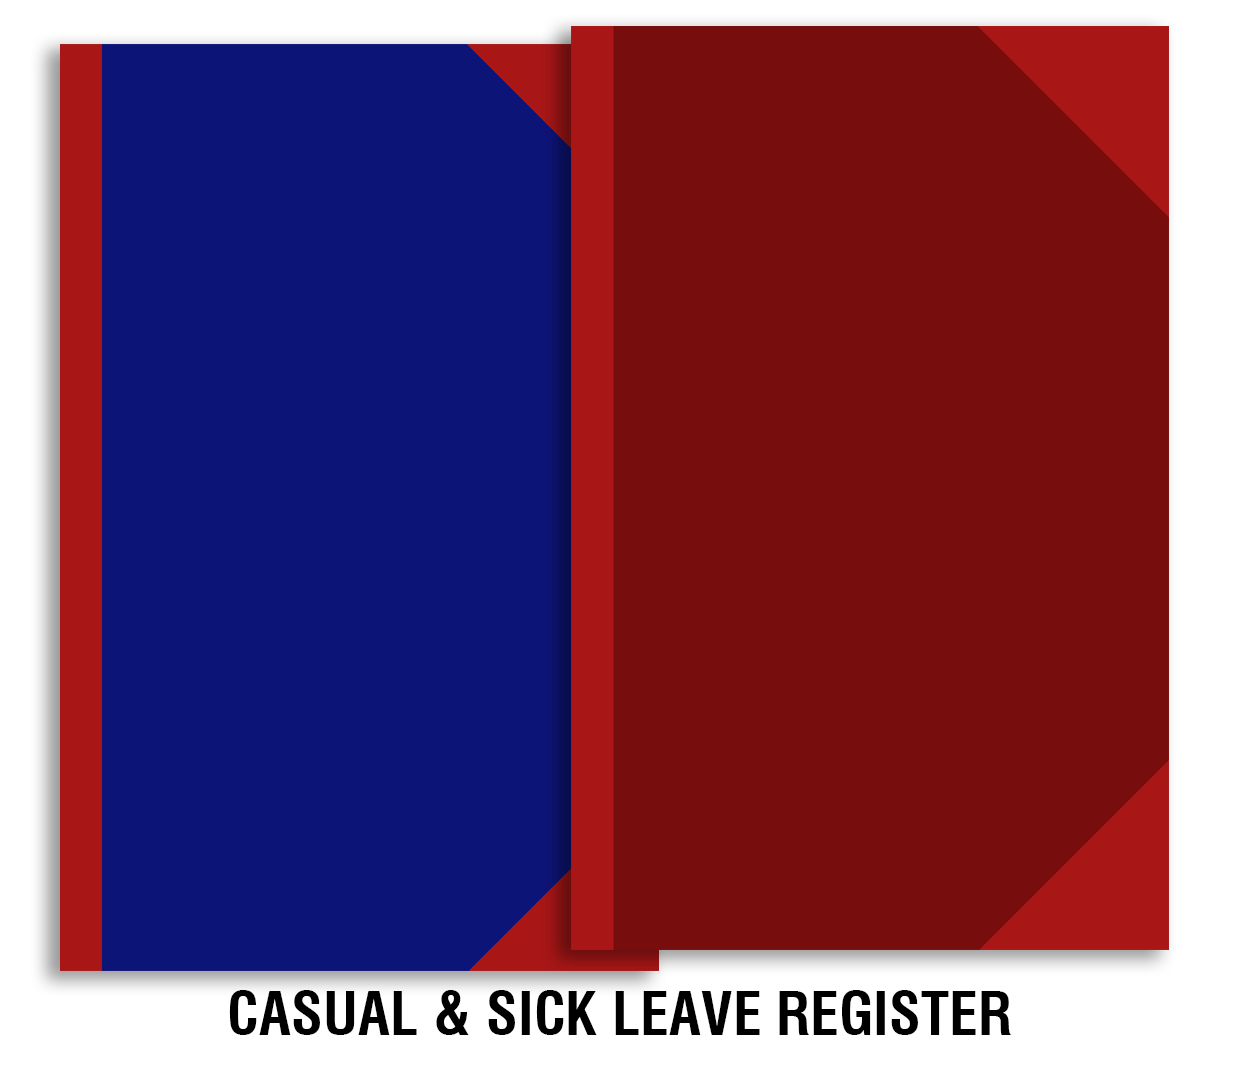 Trison Casual & Sick Leave Register | 70 GSM | Archival quality acid-free green ledger paper | Manually stitched and red canvas hardbound (R/B binding) | PVC rexine cover | Pre-printed format | Size: 21.5x34 cm | Available in No./Pages: 1/64, 2/128, 3/192, 4/256, 6/384 & 8/512 | casual & sick leave | casual sick leave 